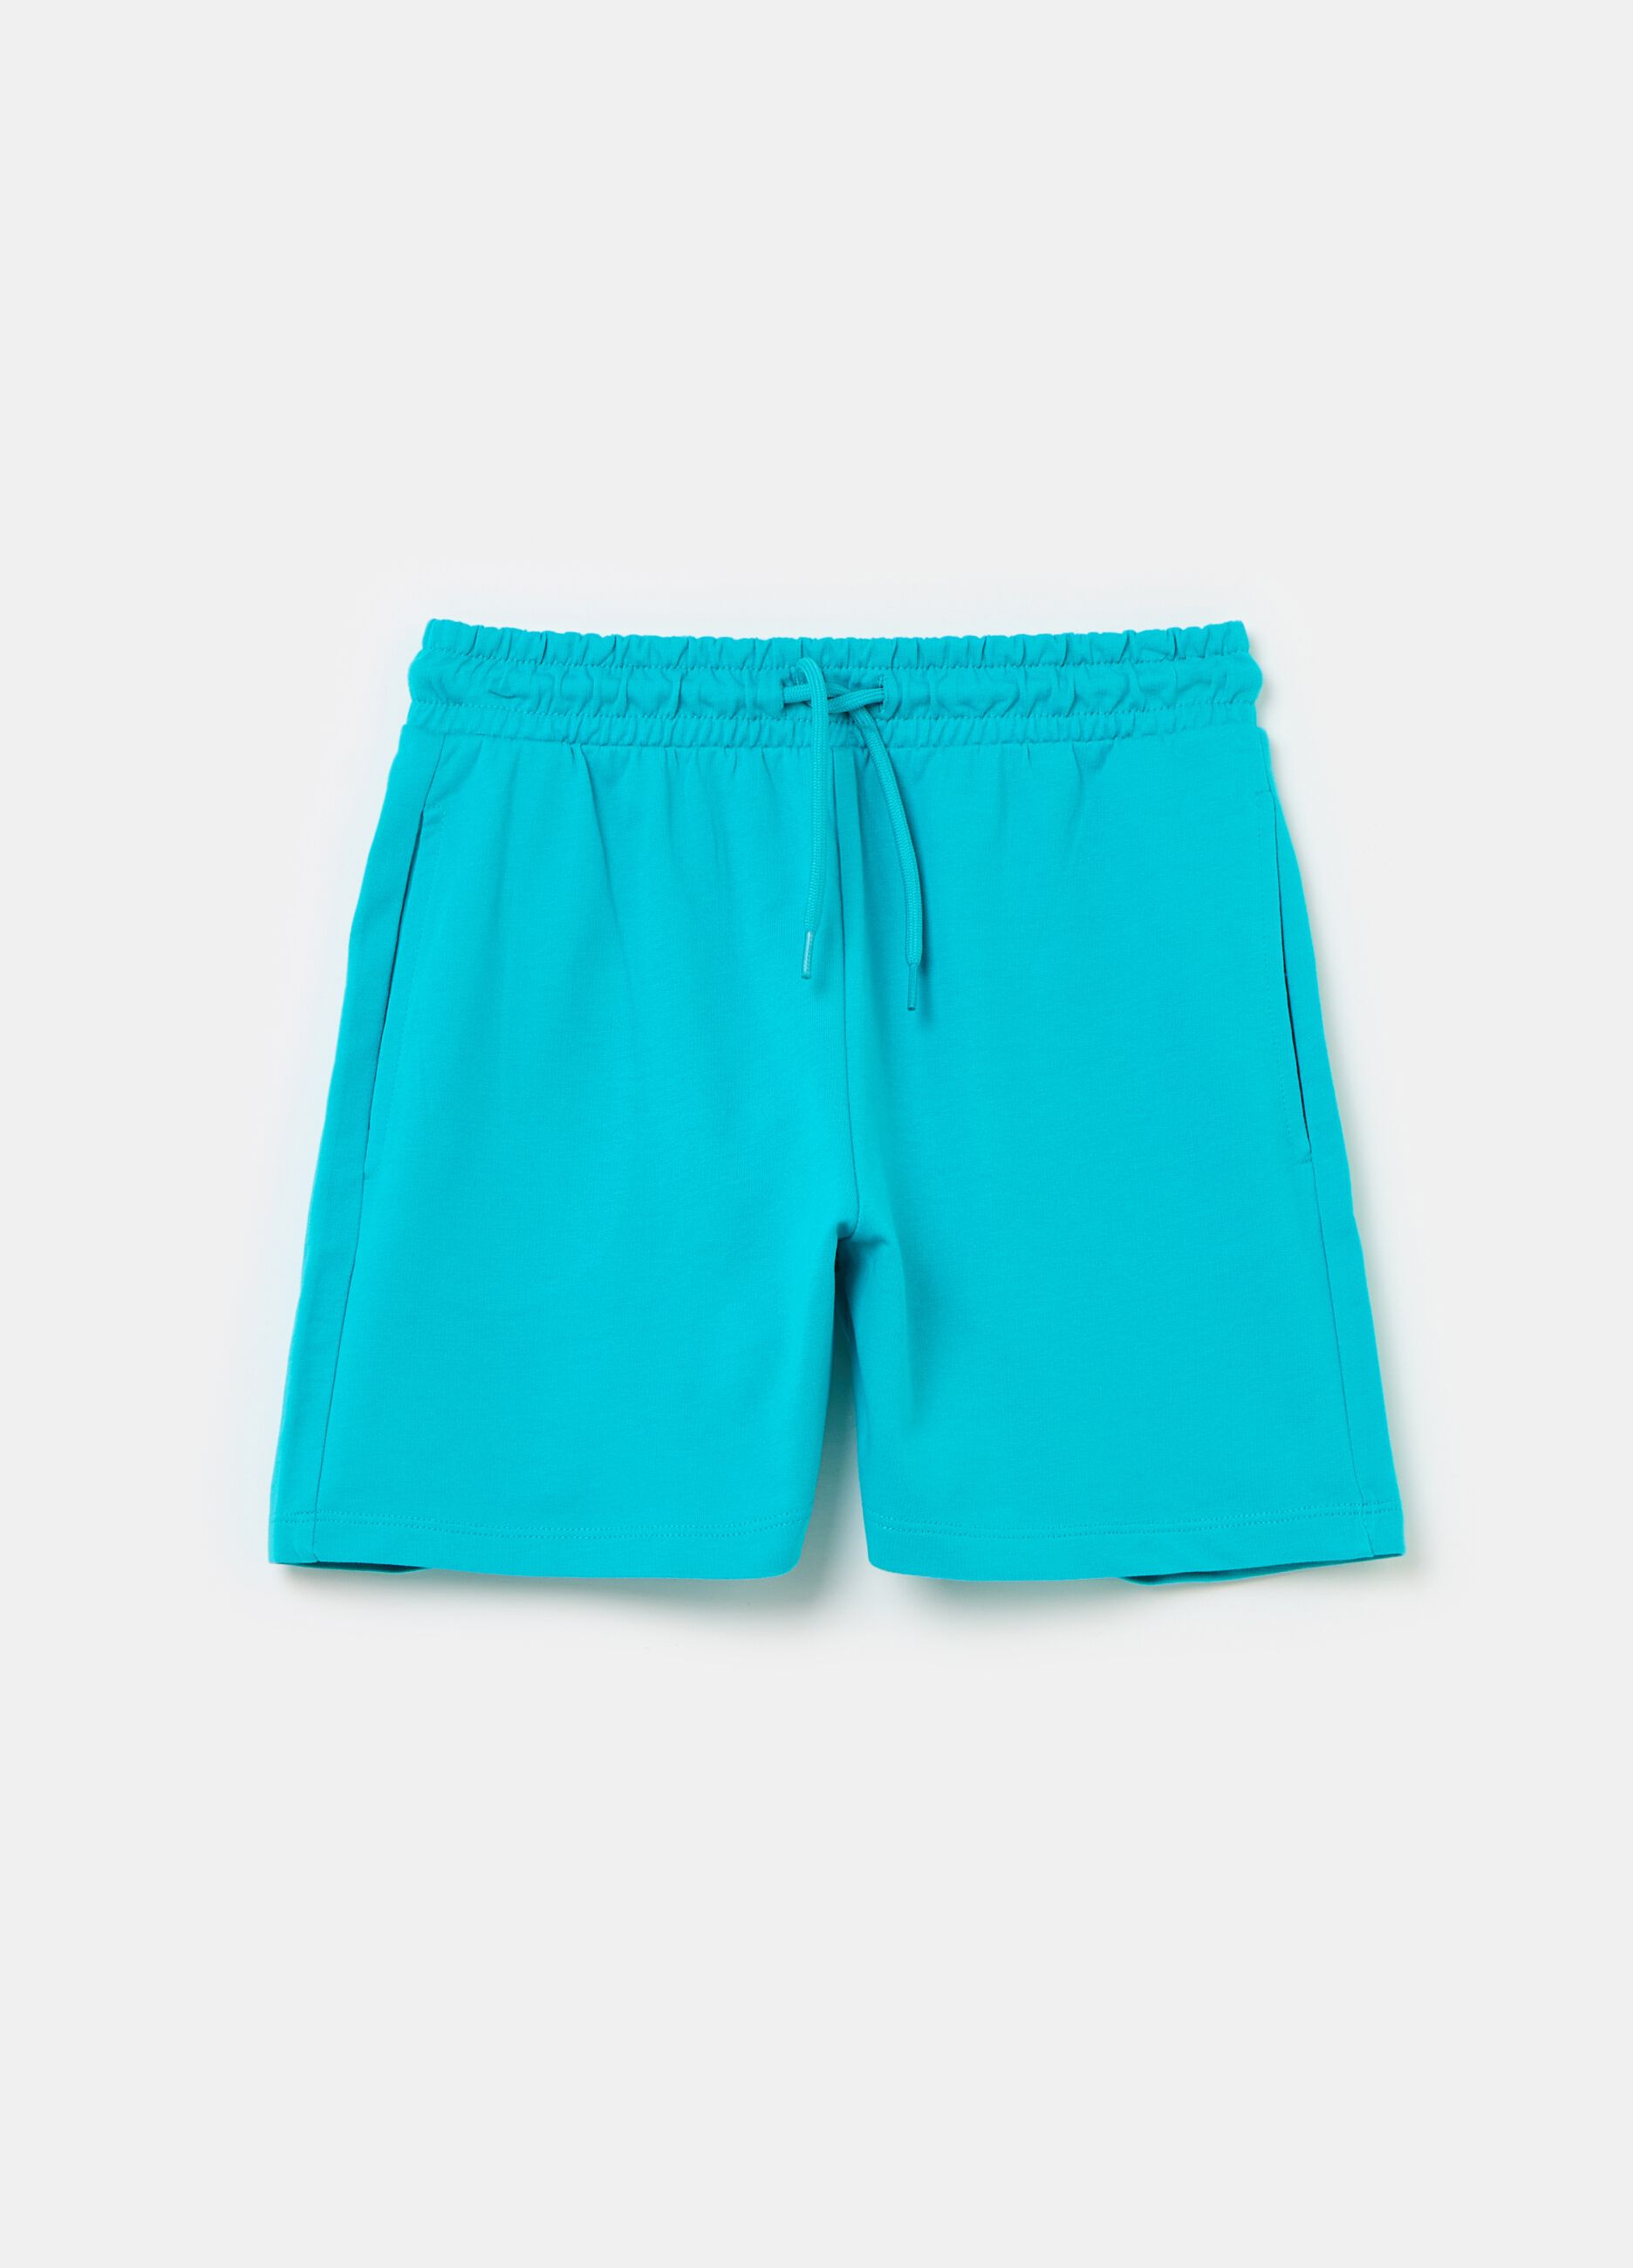 Shorts in French terry with drawstring